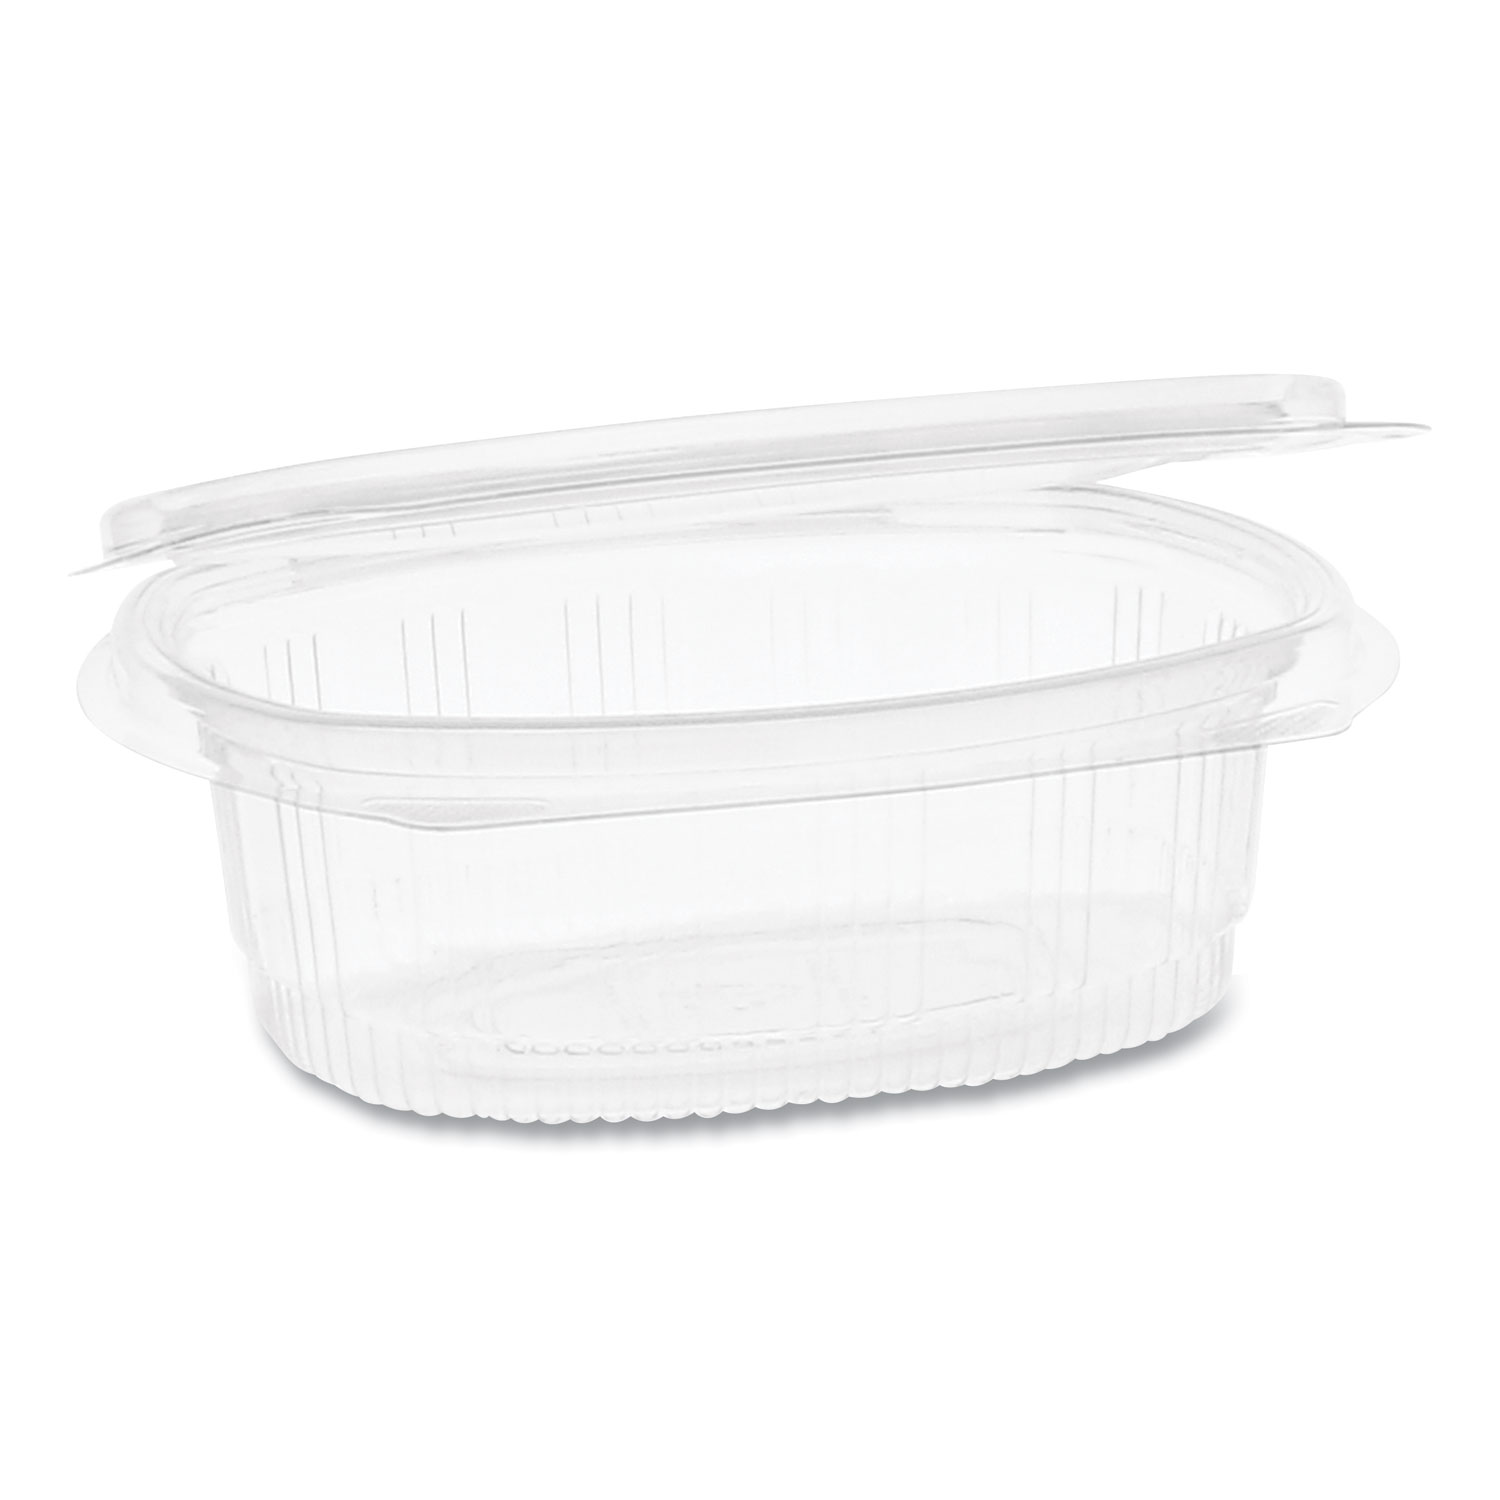  Pactiv 0CA910120000 EarthChoice PET Hinged Lid Deli Container, 4.92 x 5.87 x 1.89, 12 oz, 1-Compartment, Clear, 200/Carton (PCT0CA910120000) 